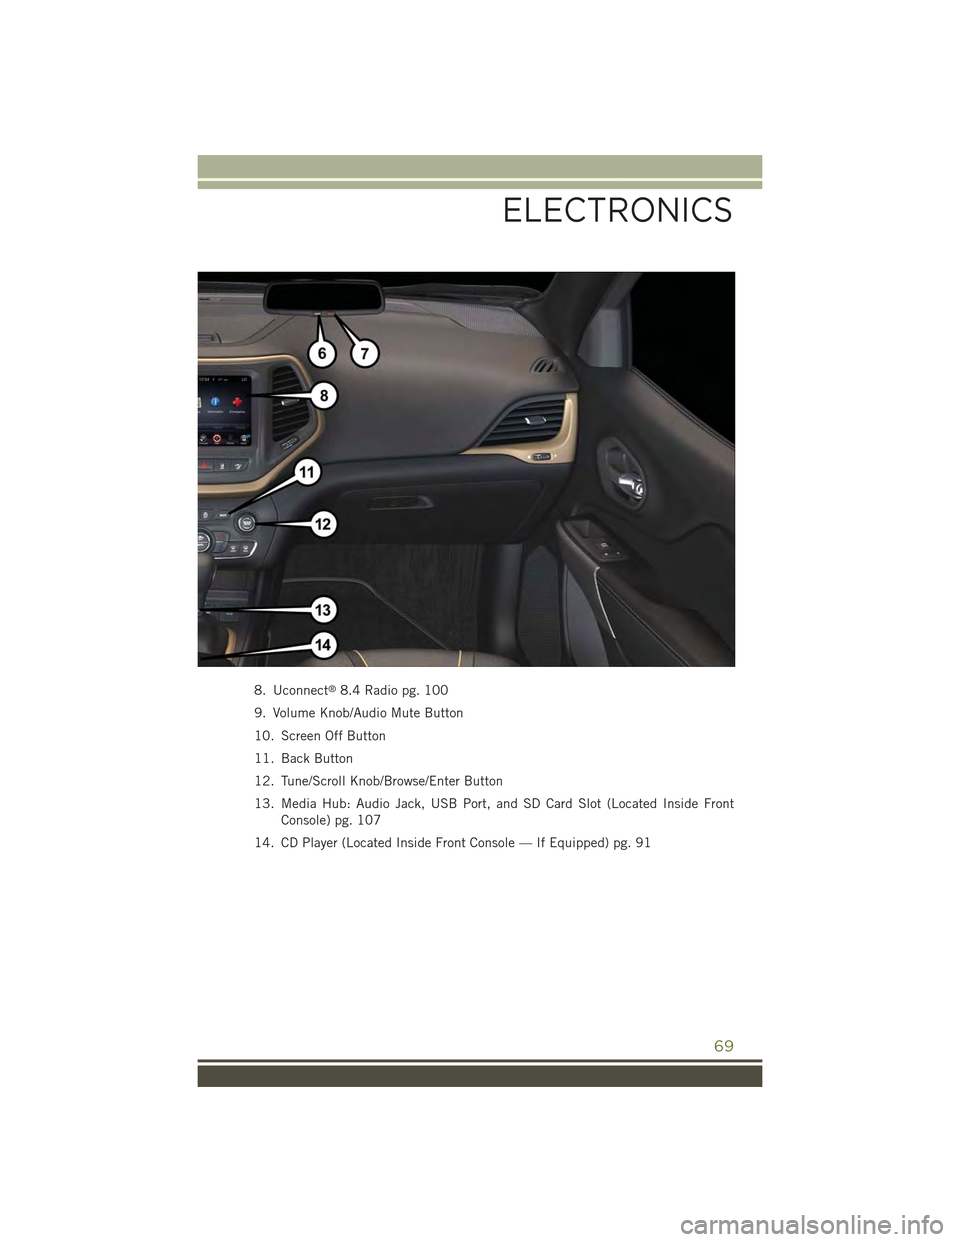 JEEP CHEROKEE 2015 KL / 5.G User Guide 8. Uconnect®8.4 Radio pg. 100
9. Volume Knob/Audio Mute Button
10. Screen Off Button
11. Back Button
12. Tune/Scroll Knob/Browse/Enter Button
13. Media Hub: Audio Jack, USB Port, and SD Card Slot (Lo